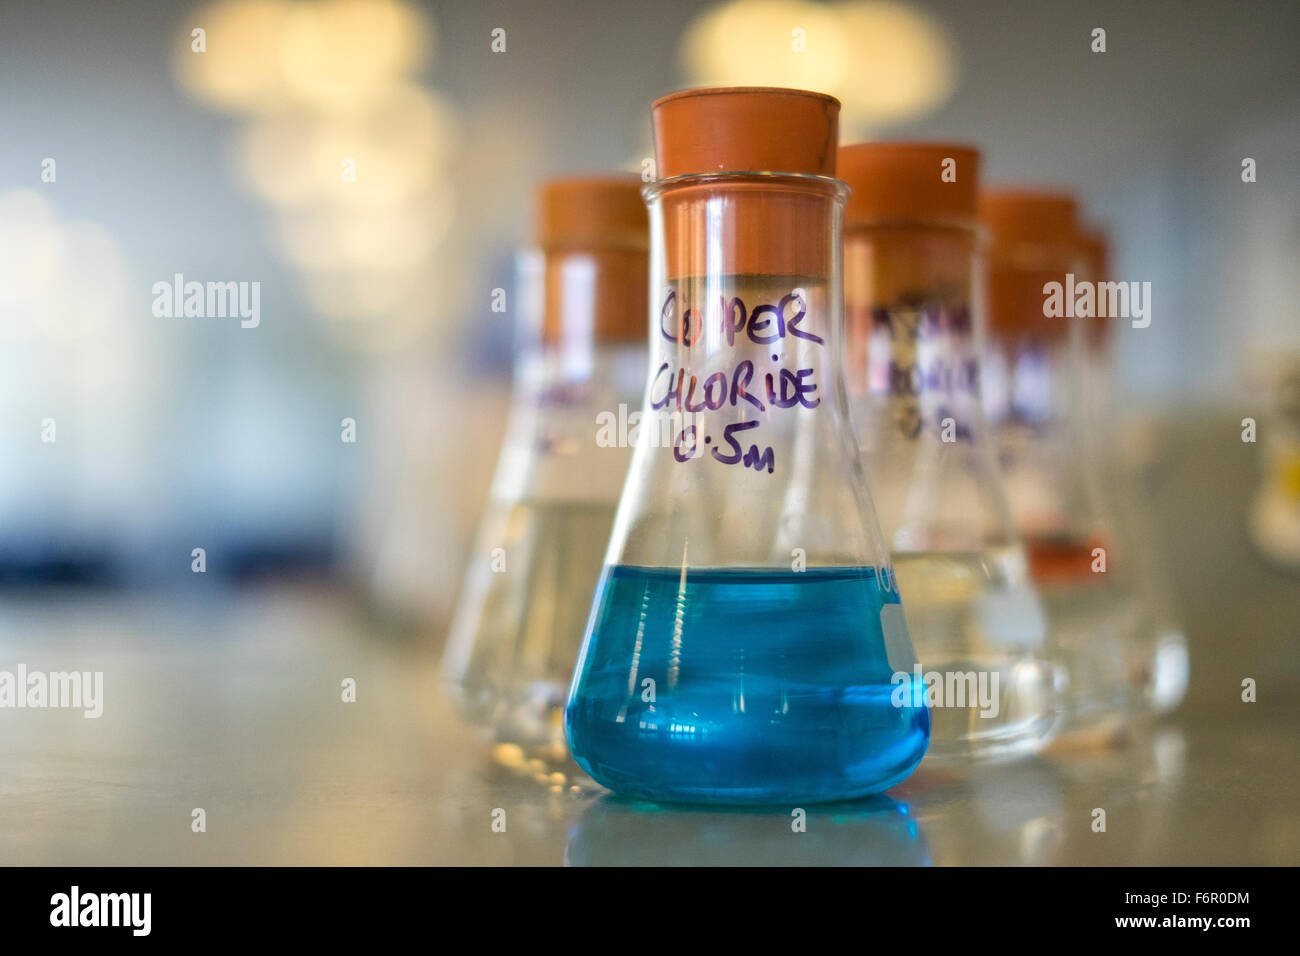 Chemistry lab glass beakers chemicals science Stock Photo